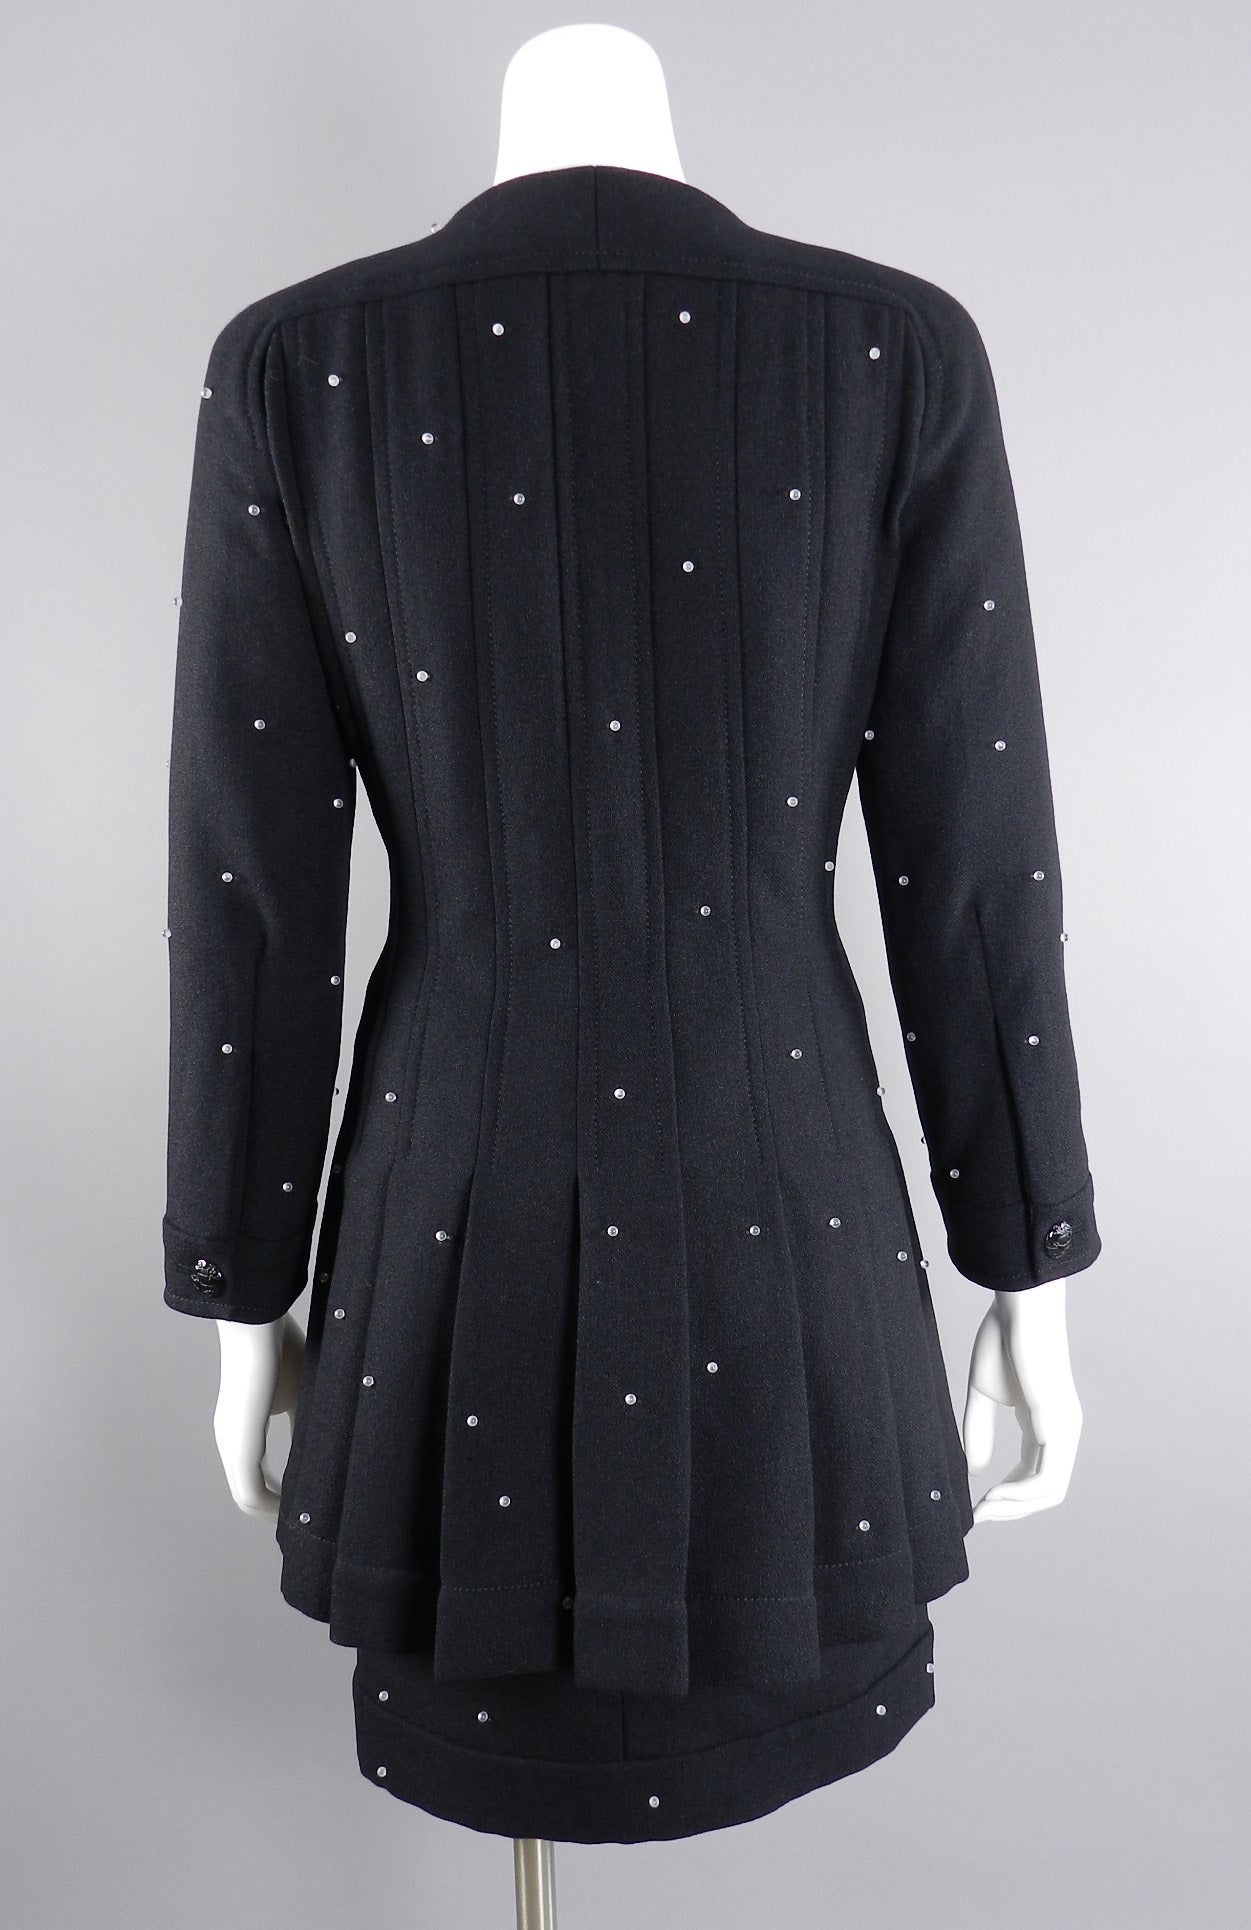 Chanel 13A Black Wool Dress Coat and Skirt Suit With Clear Beads 1